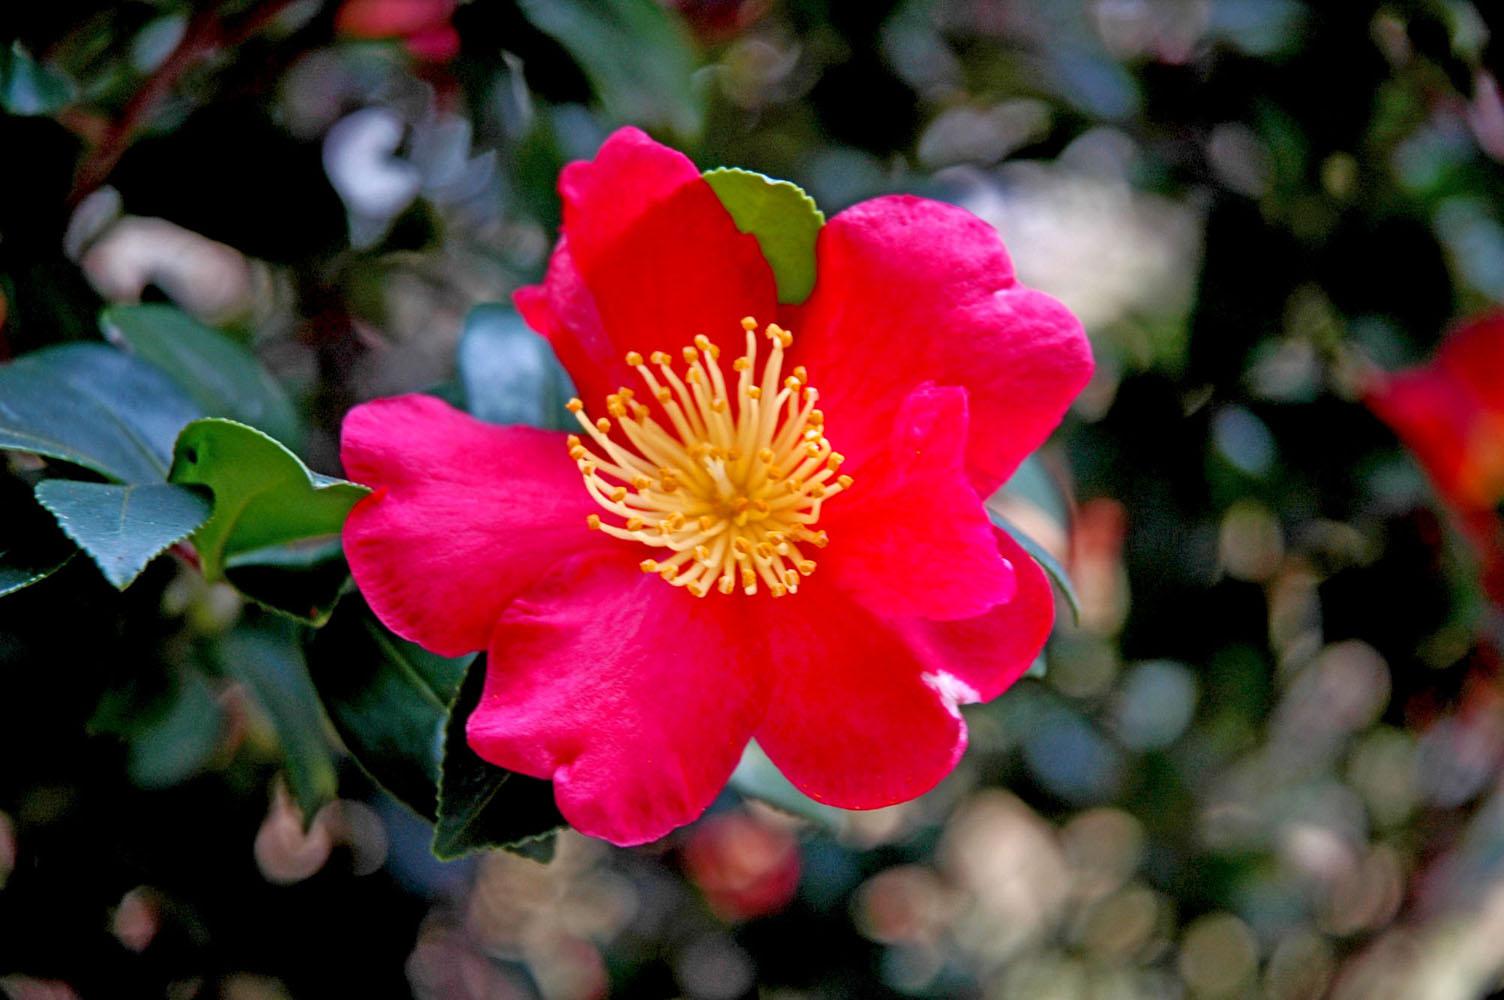 Yuletide camellia is an award-winning favorite bearing loads of red flowers coupled with bright yellow stamens. Unlike other holiday plants that typically last for only one season, Yuletide will bloom every year for the holidays and is a compact shrub offering an evergreen appearance in the winter landscape